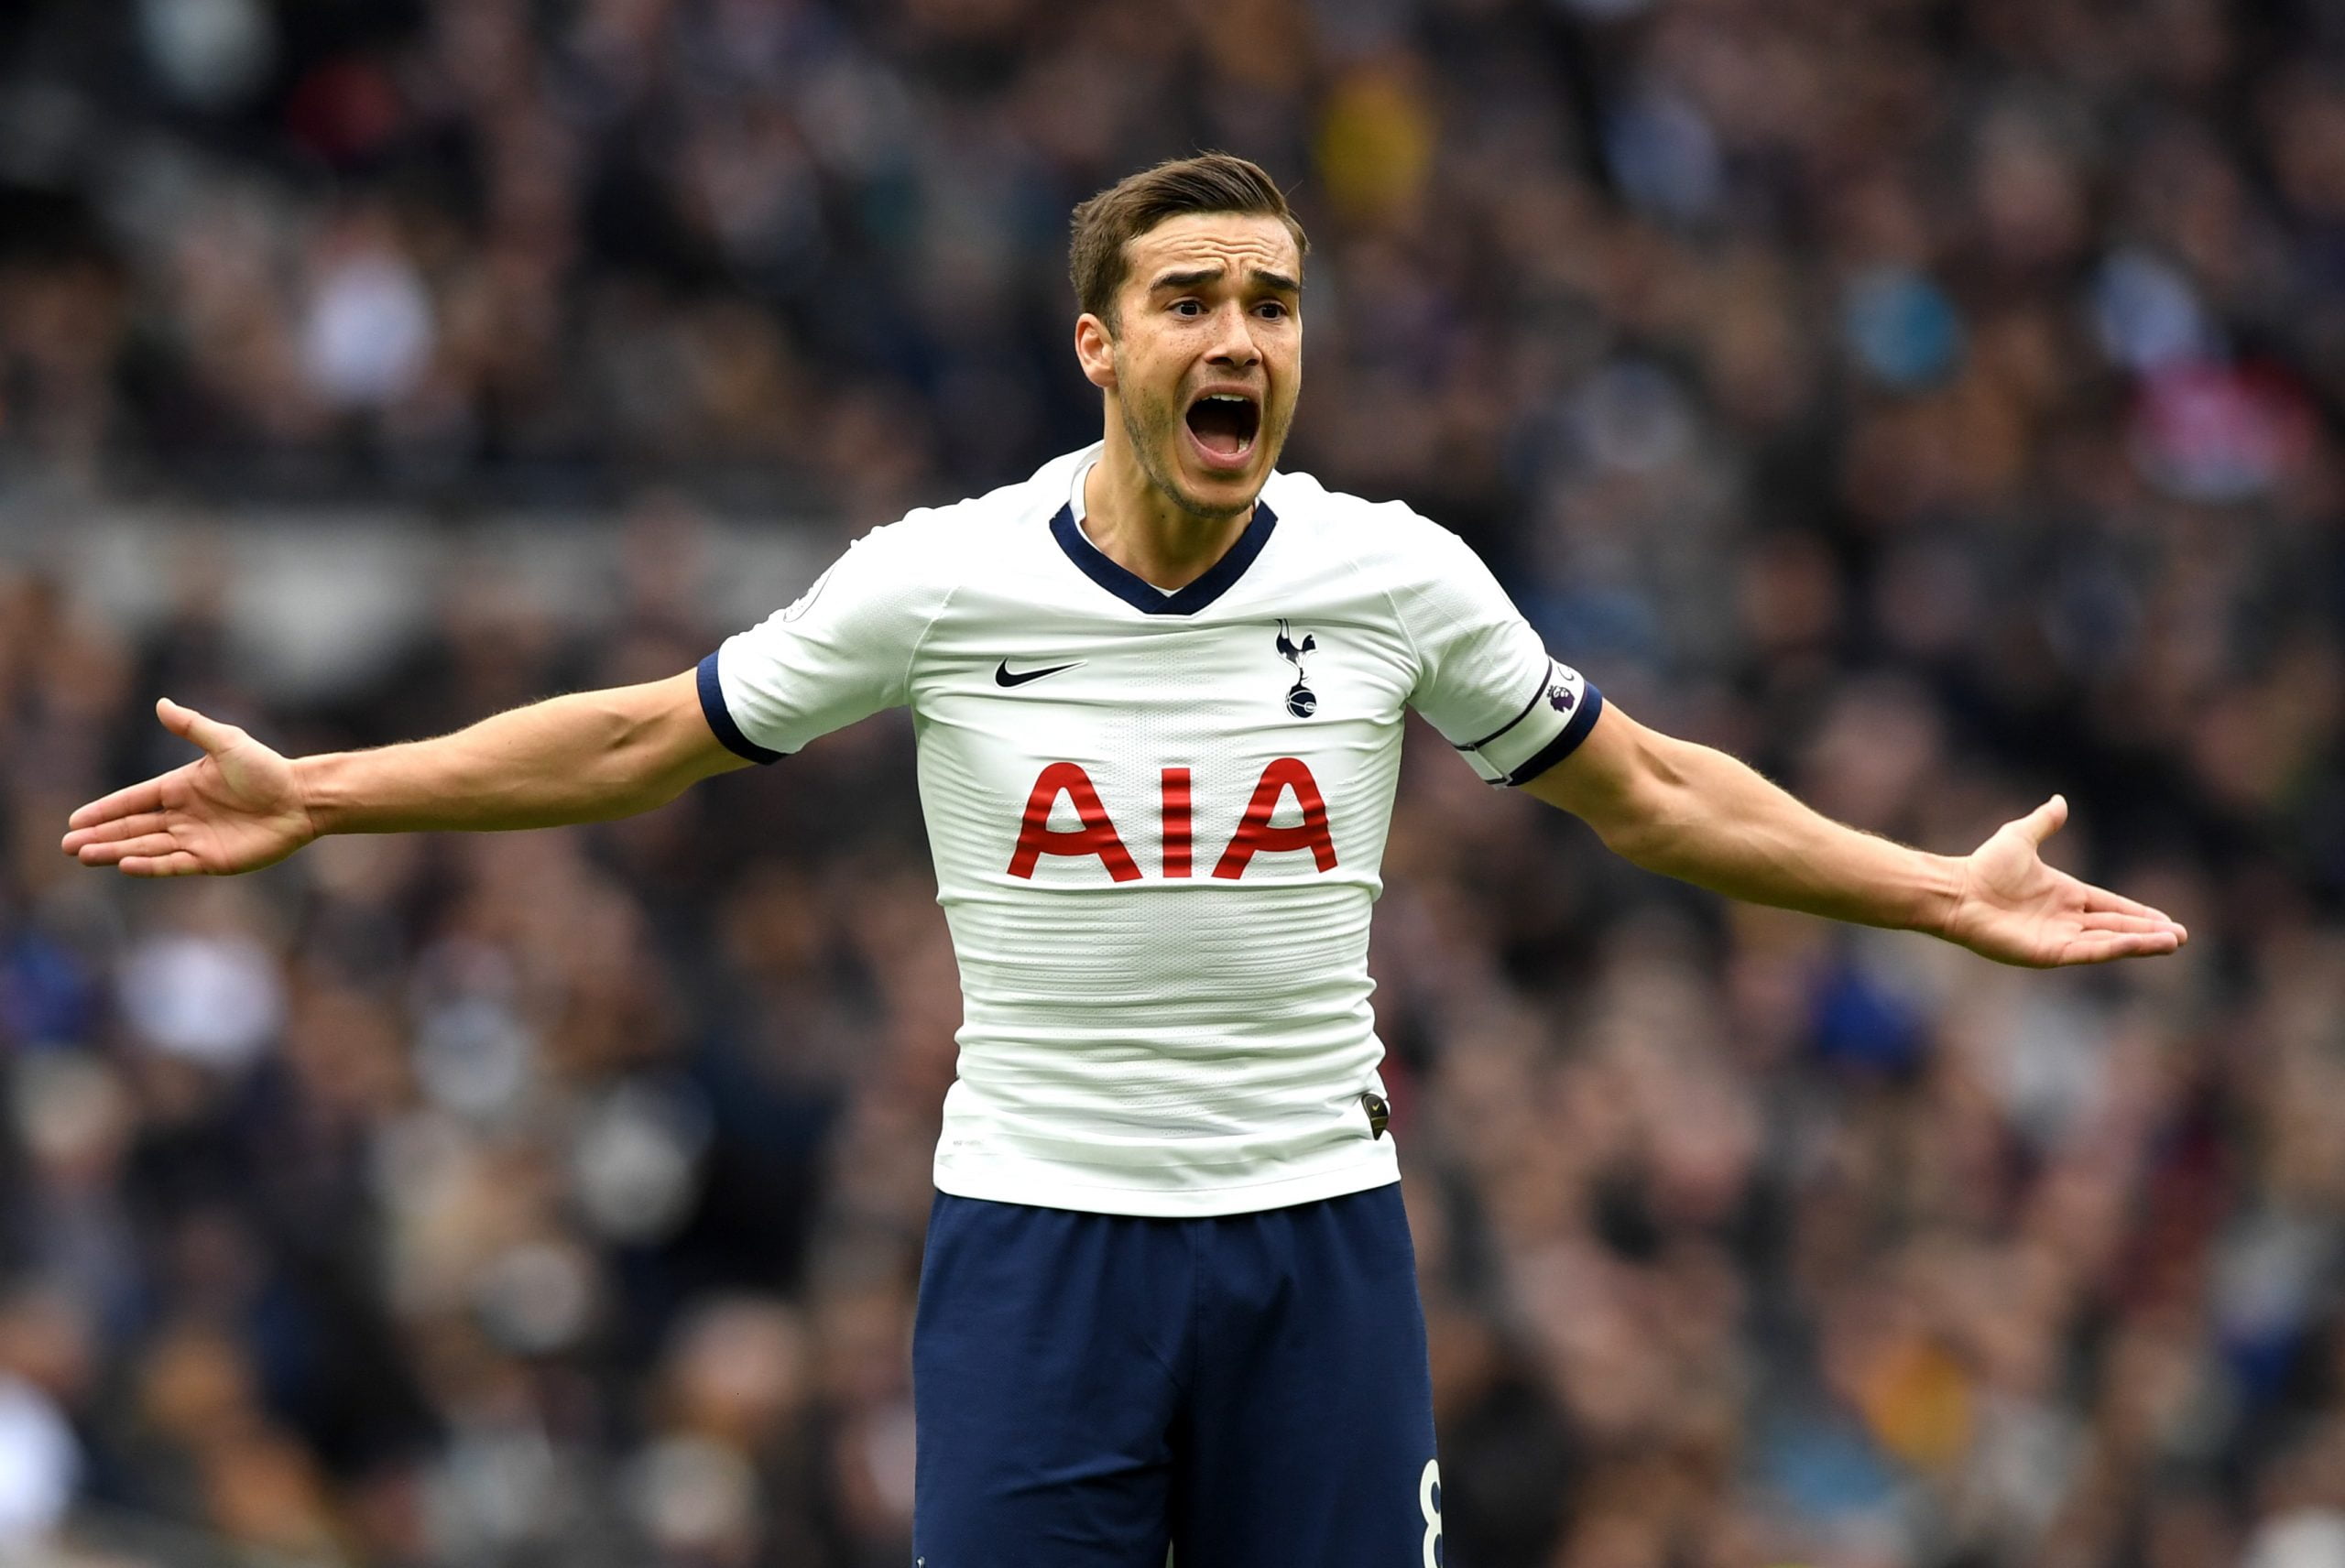 Harry Winks has opened up about his prospects at Tottenham - Not the right fit under Jose.